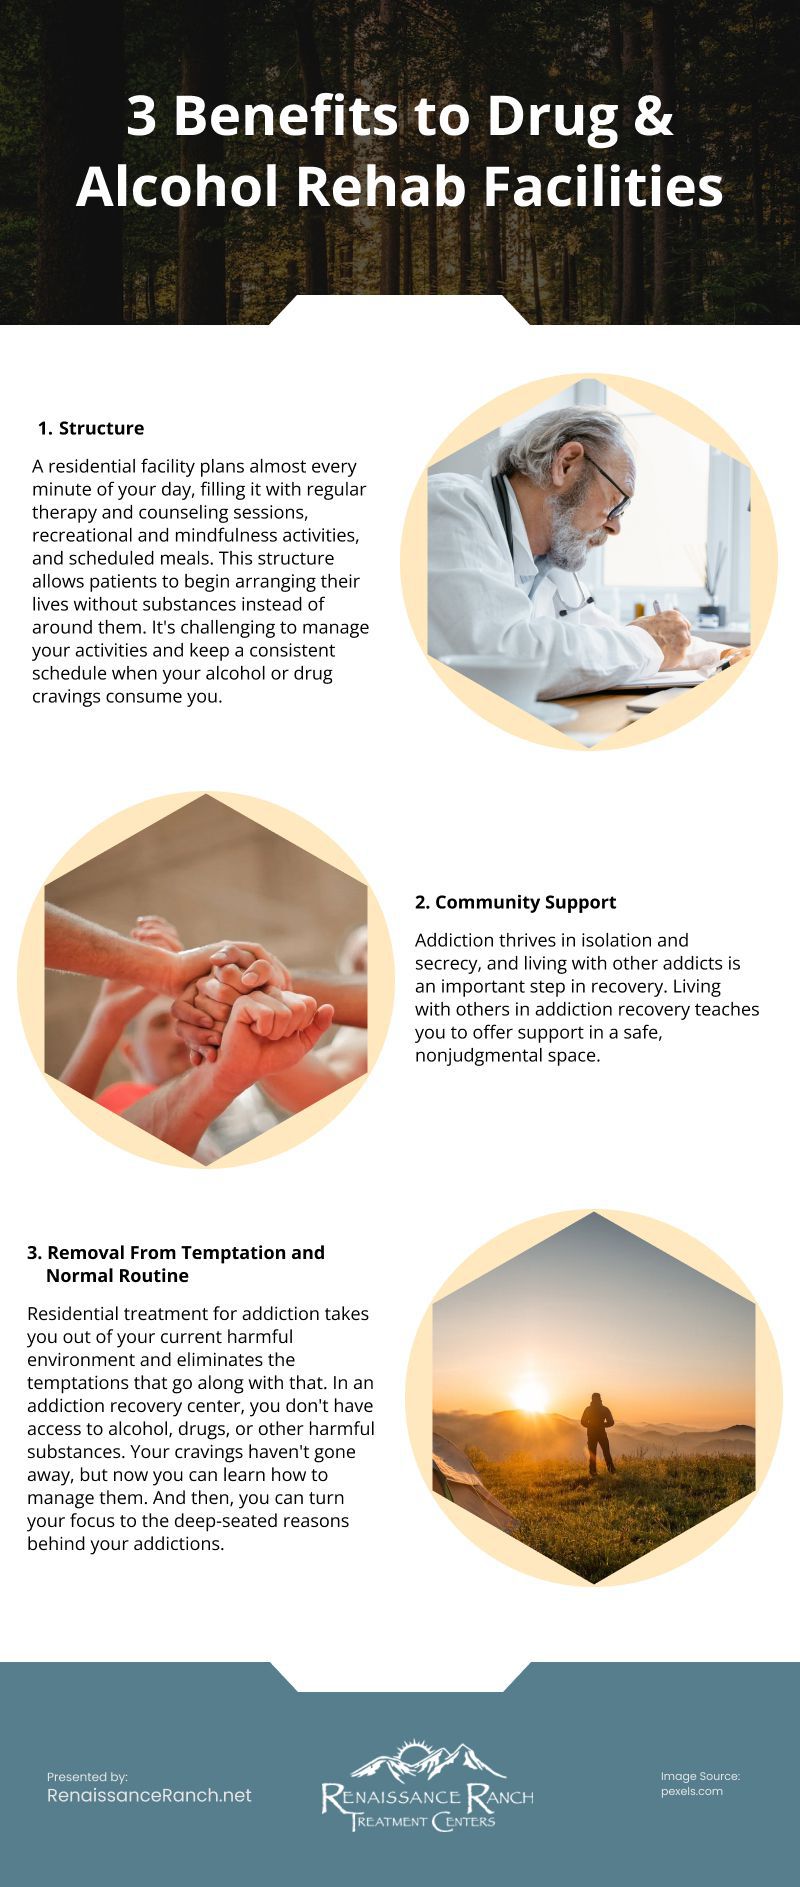 3 Benefits to Drug and Alcohol Rehab Facilities Infographic